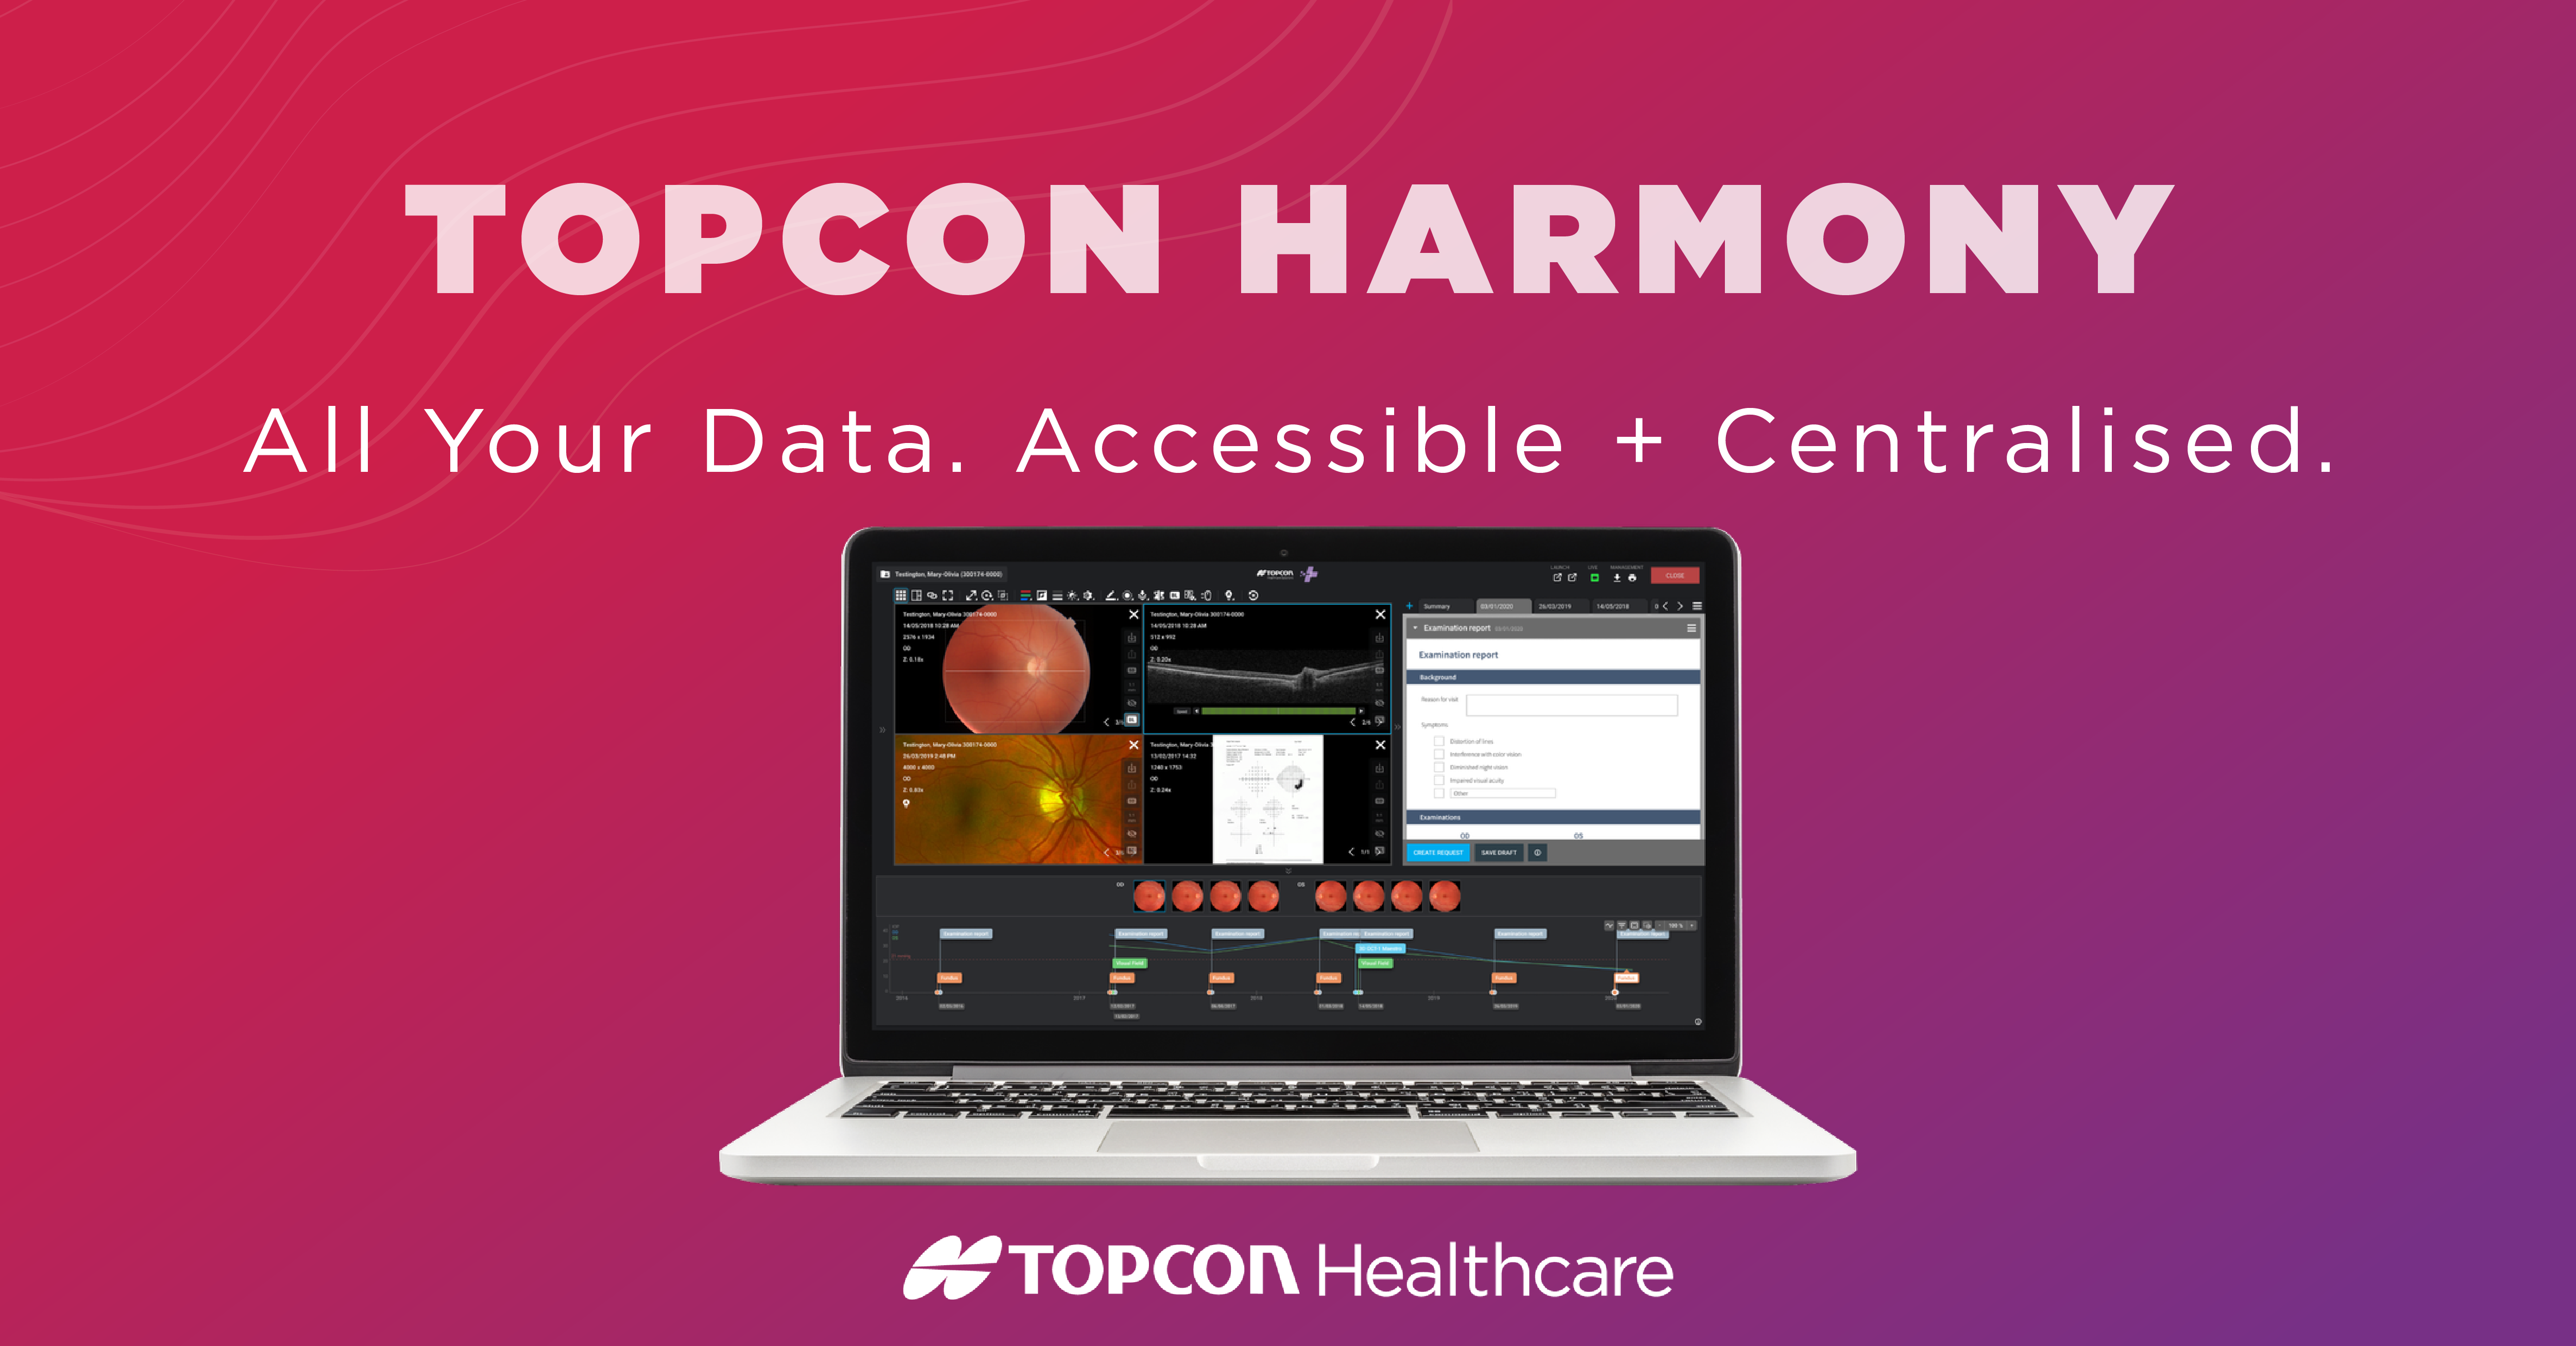 Topcon Harmony will be showing on our stand at 100% Optical